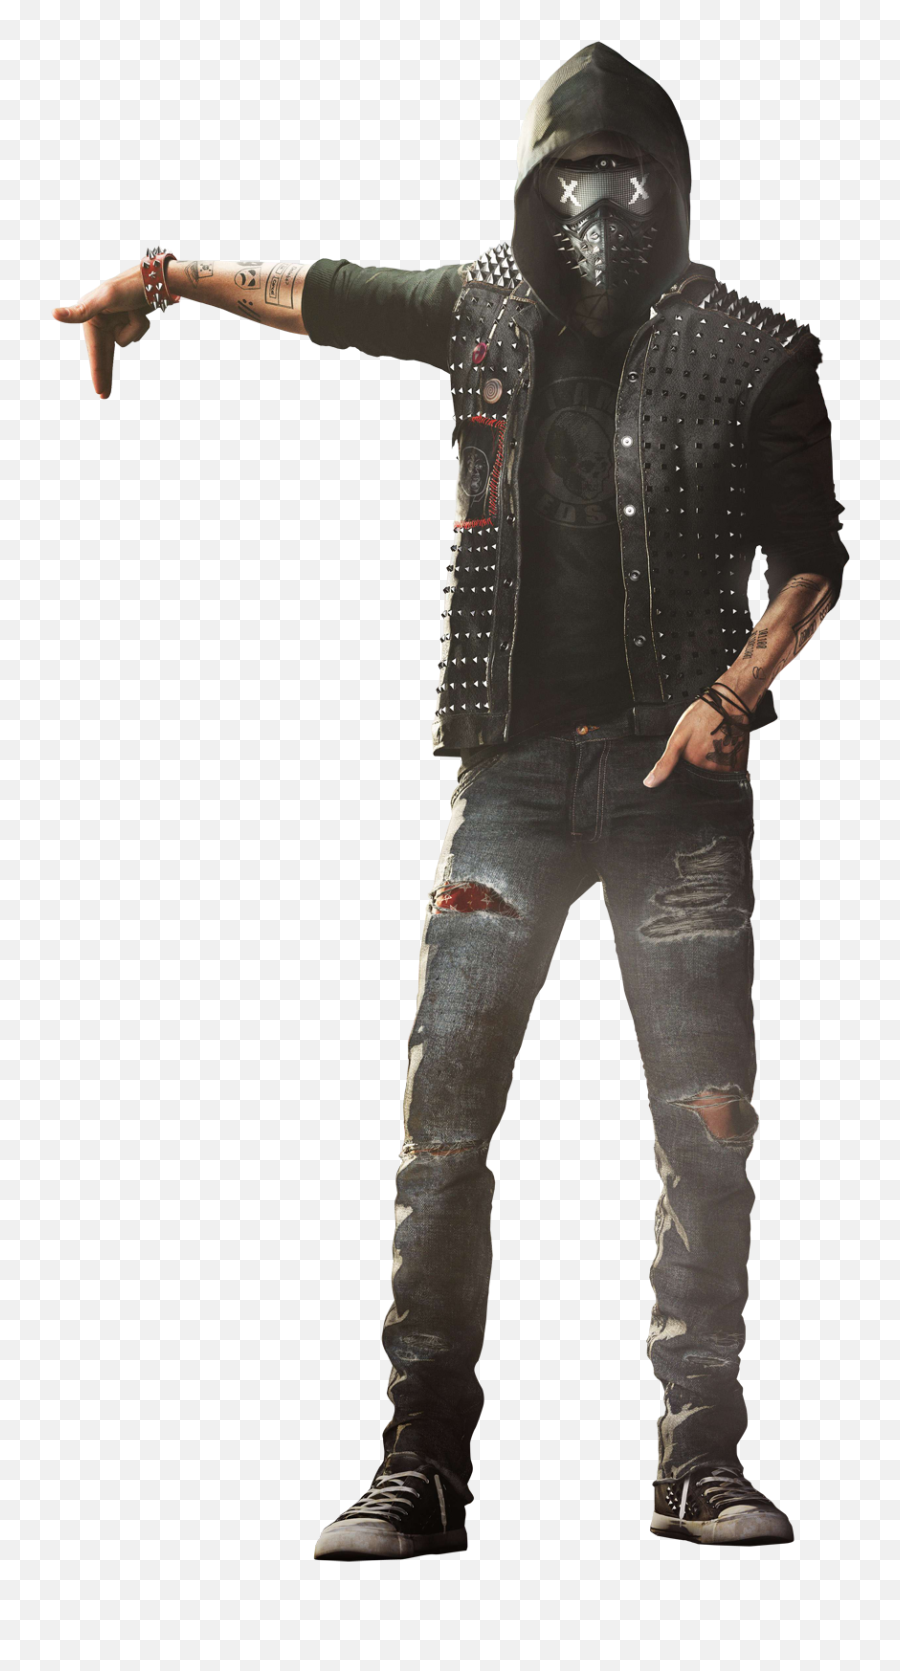 Watch Dogs 2 Png 5 Image - Watch Dogs 2 Wrench Transparent Background,Watch Dogs 2 Png